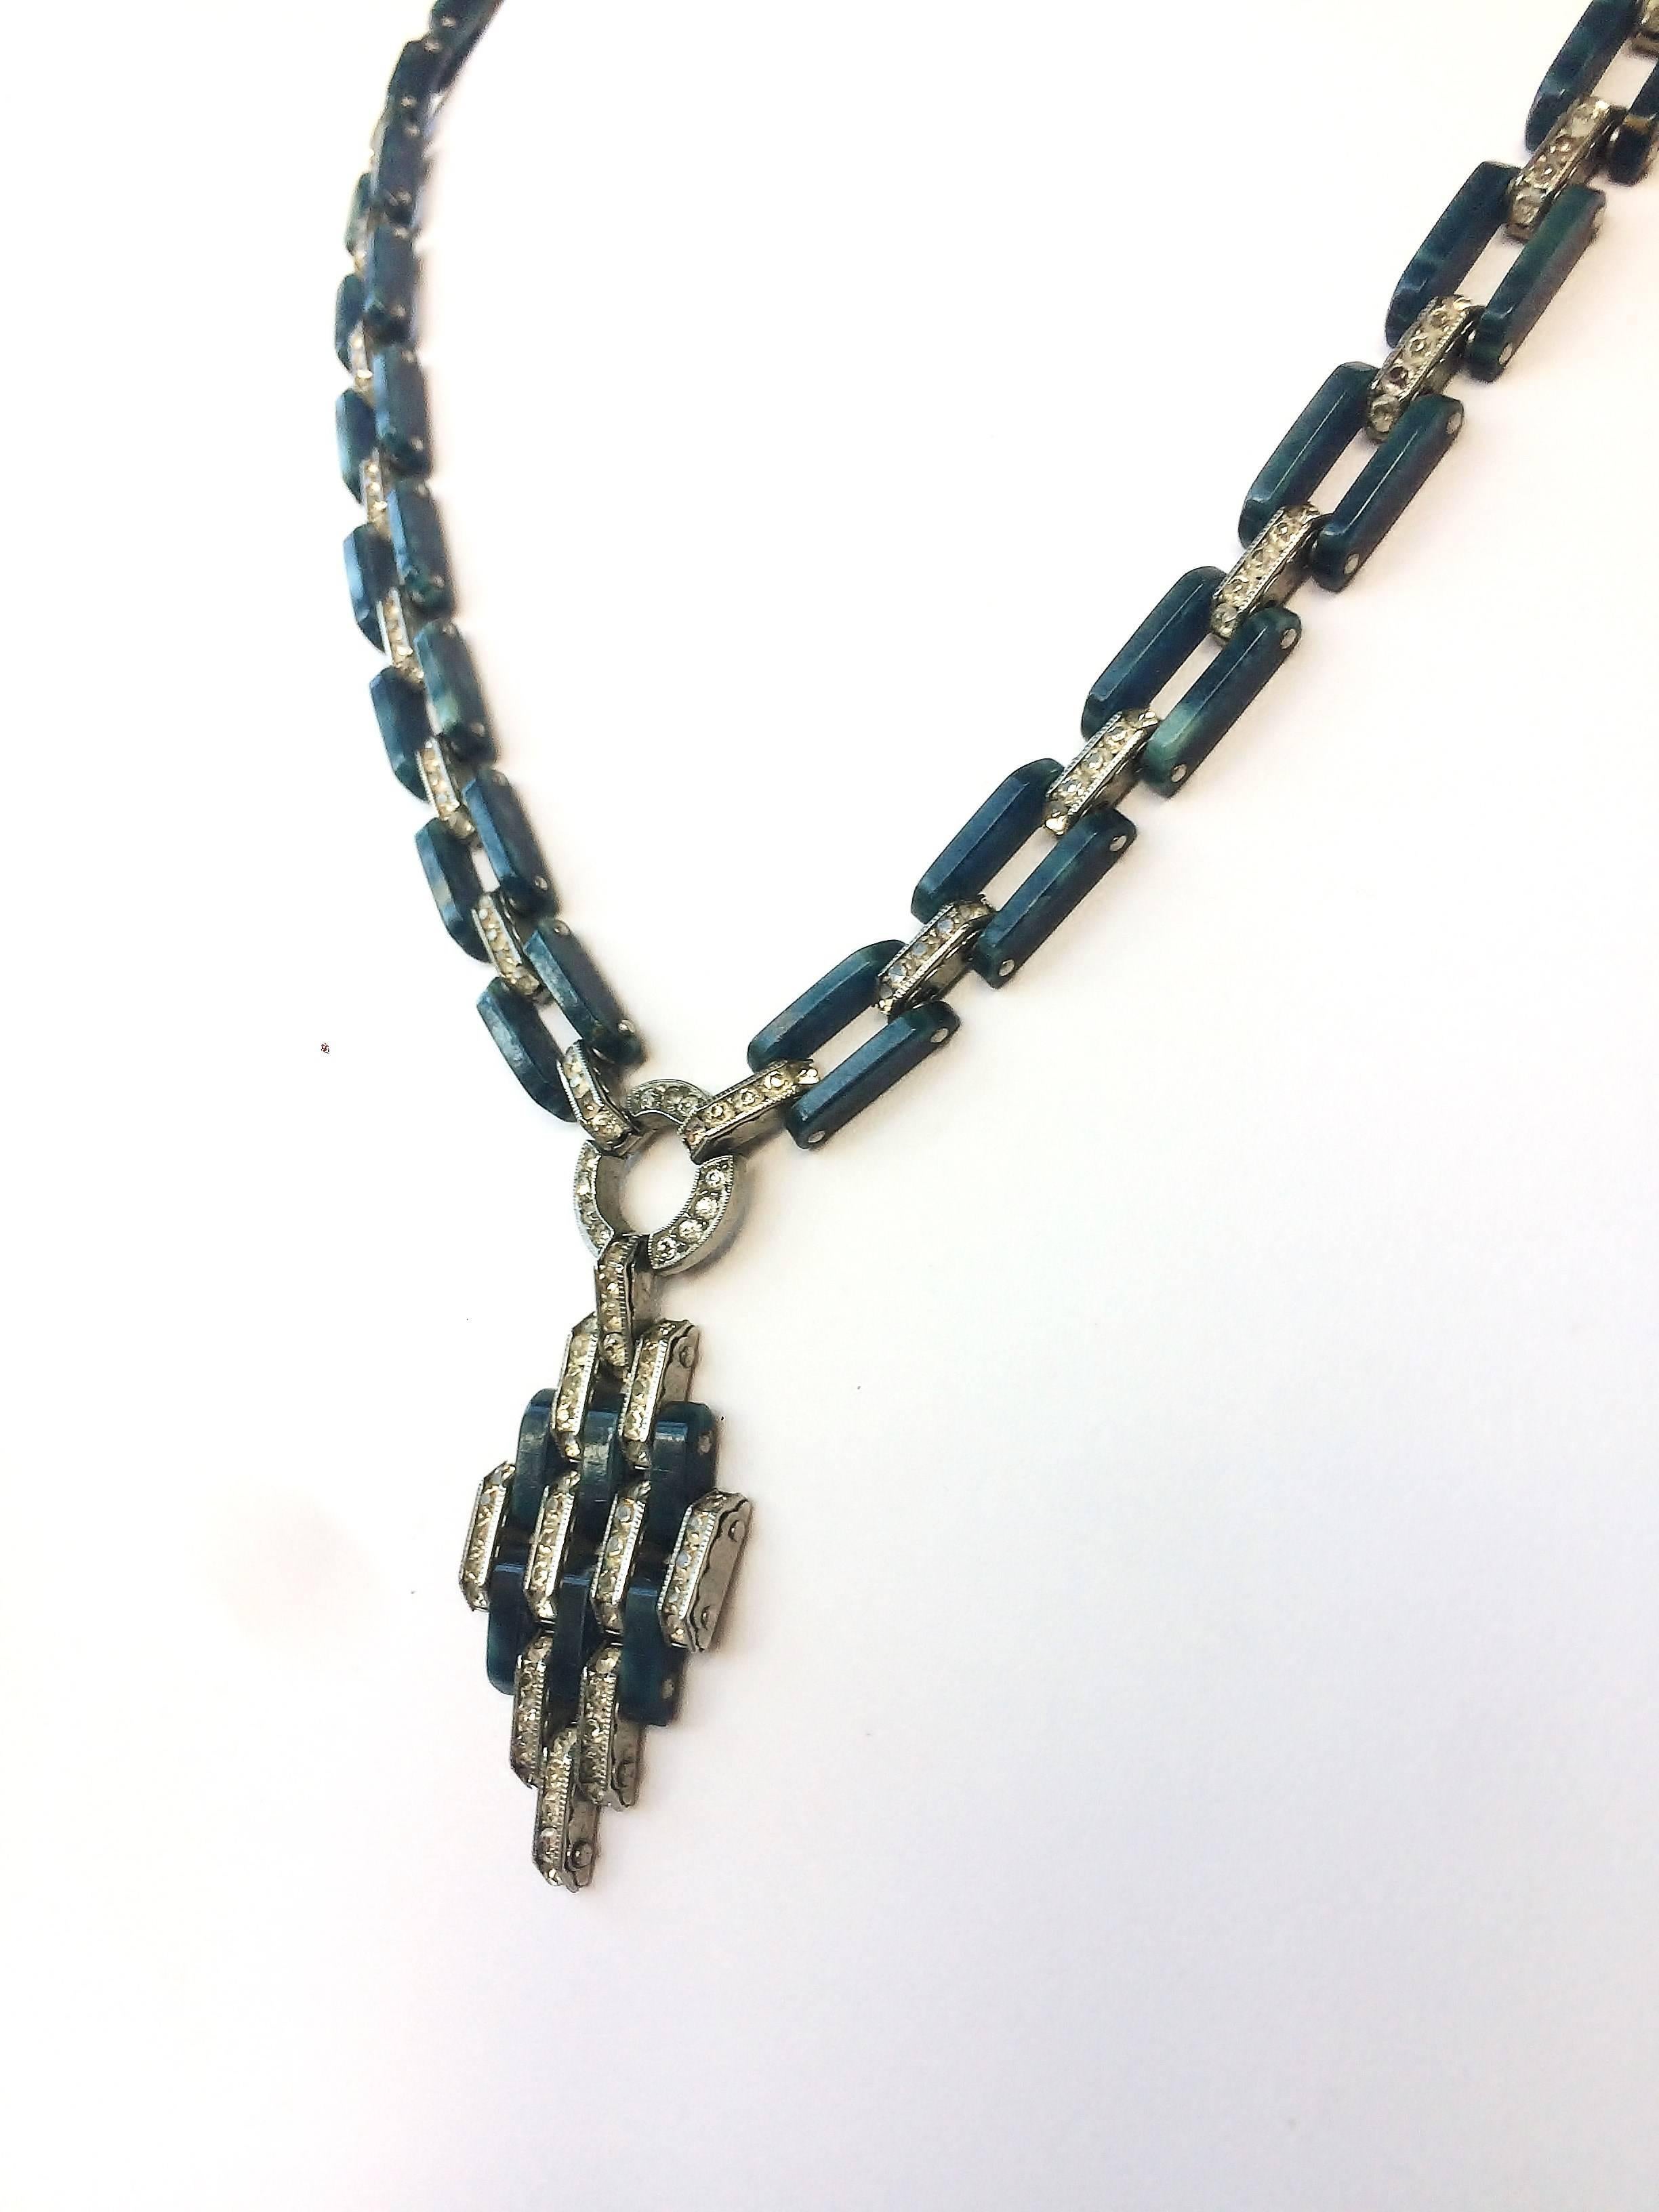 In excellent condition with clear channel set pastes and  chain links in an unusual petrol/dark blue marbled Bakelite, this very stylised, high Art Deco necklace is stamped 'D.R.G.M.', a mark very well know amongst Art Deco jewellery aficionados.